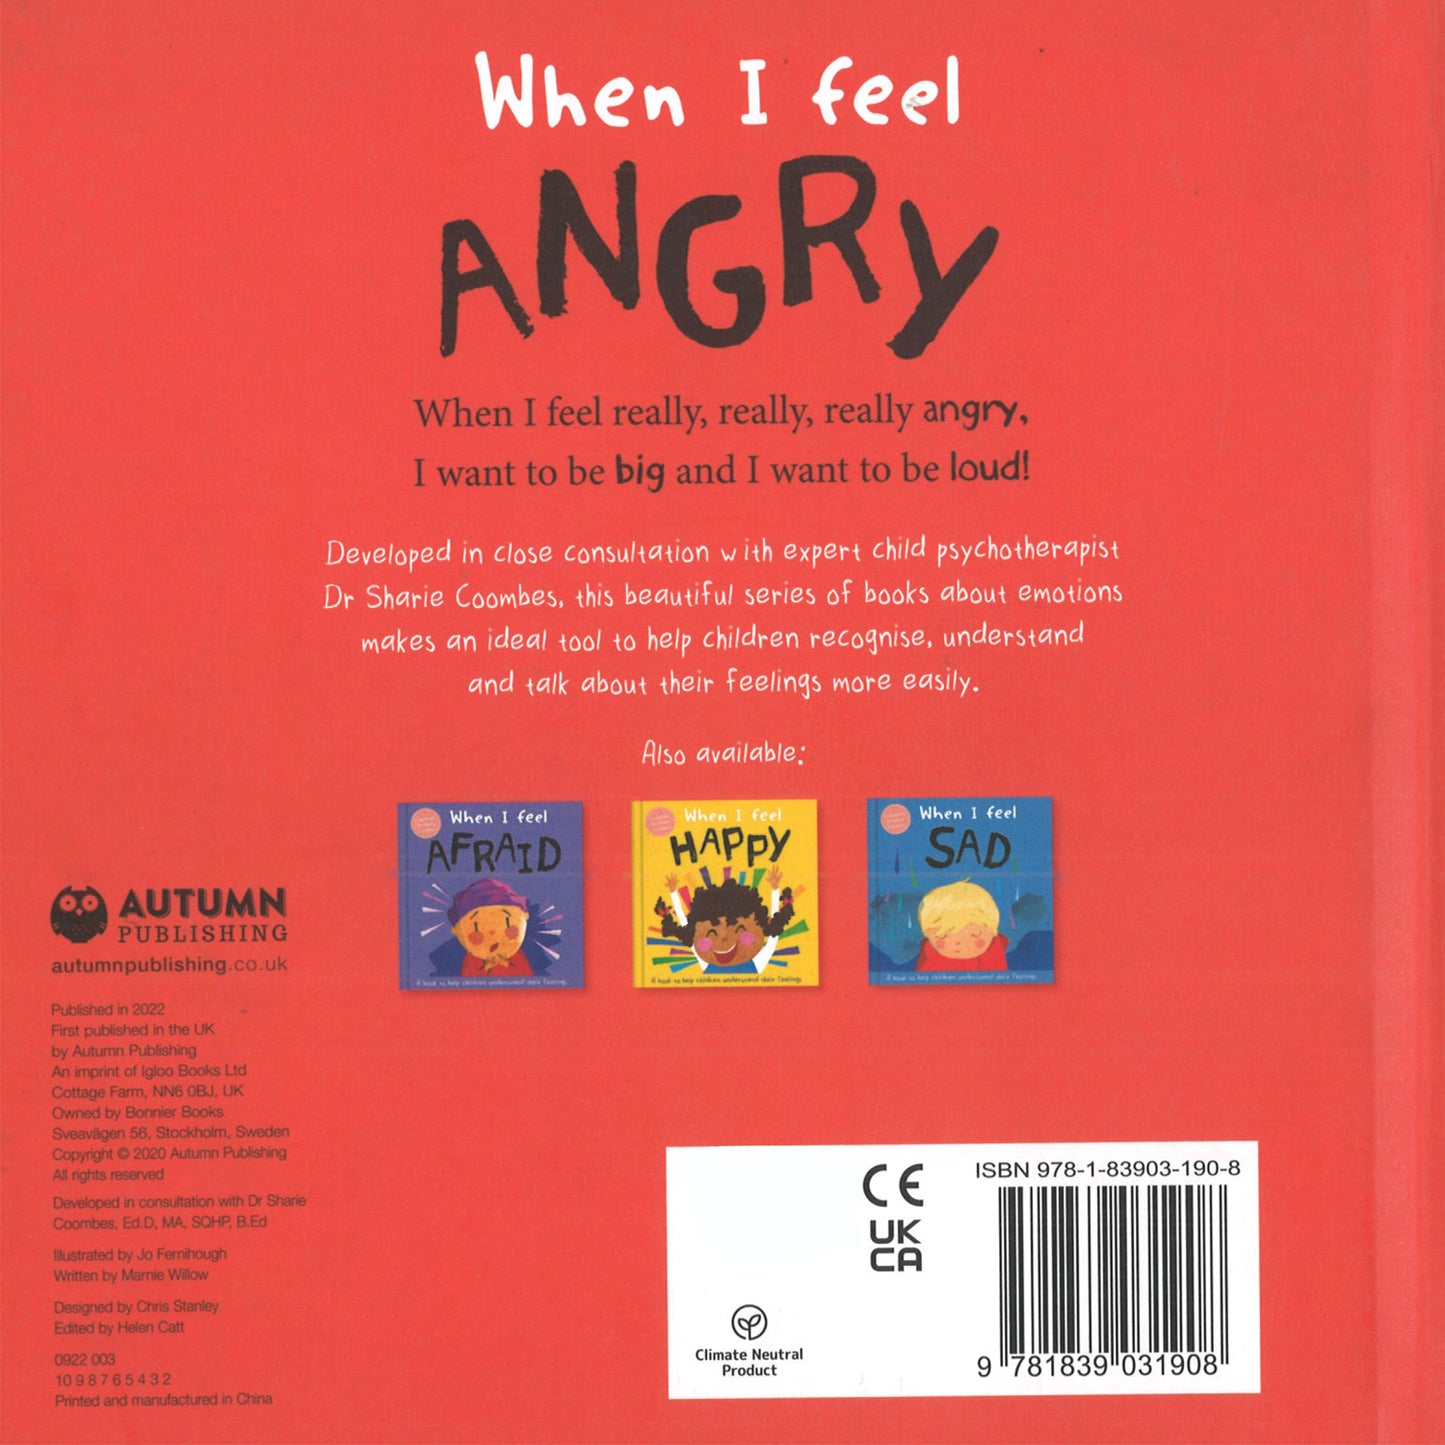 When I Feel Angry (A Children's Book about Emotions) [Hardcover] Coombes, Dr Sharie